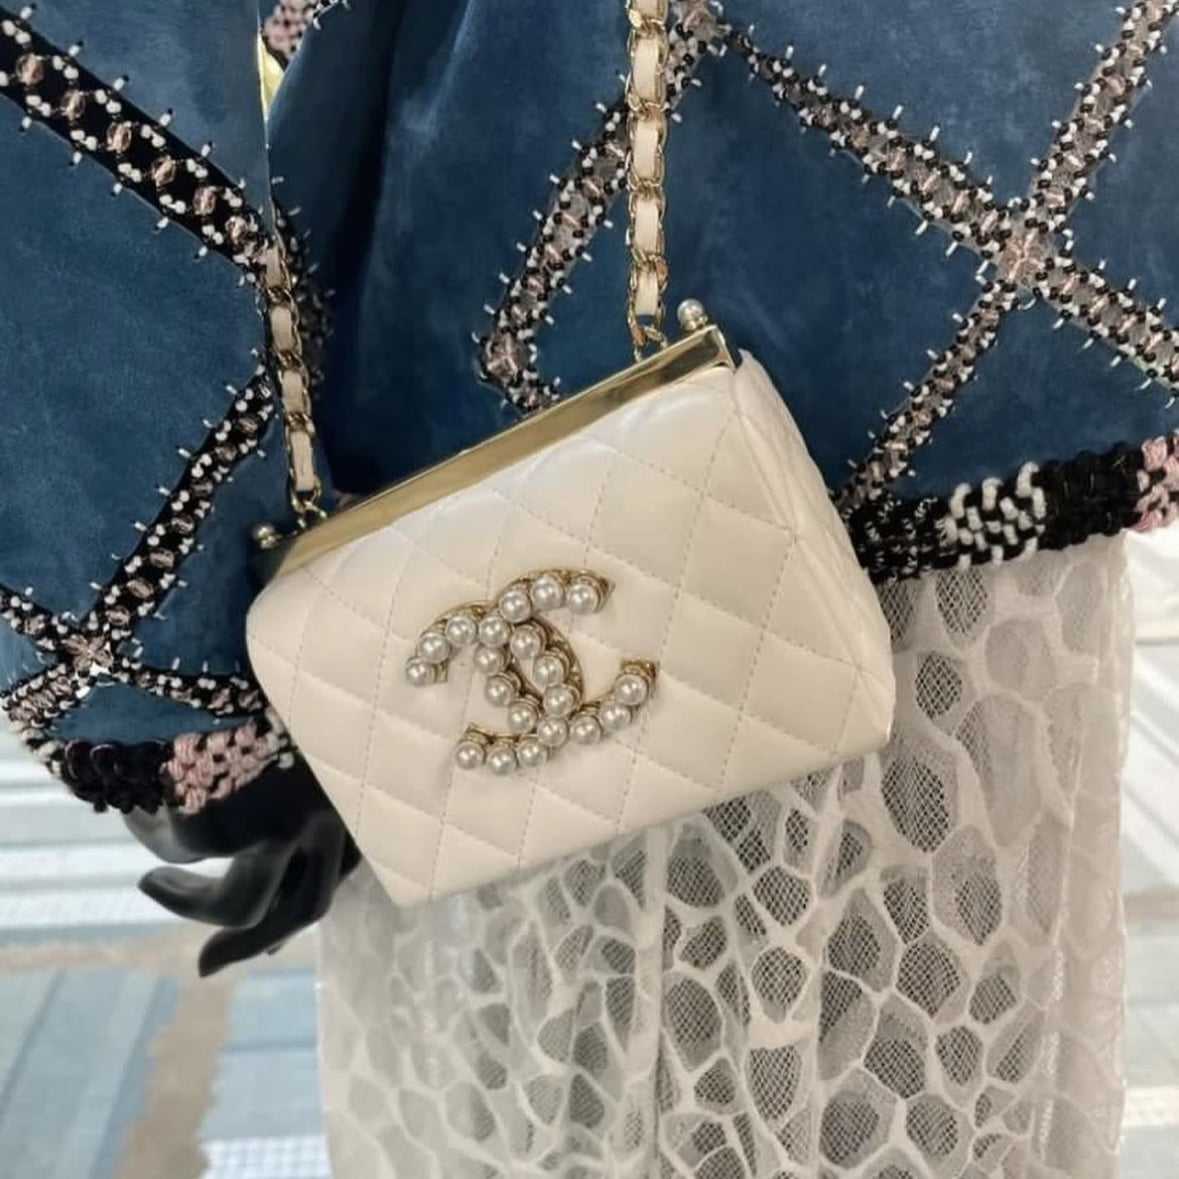 Chanel 2022/23 Métiers d'art Collection Is Big on Bags - Large and